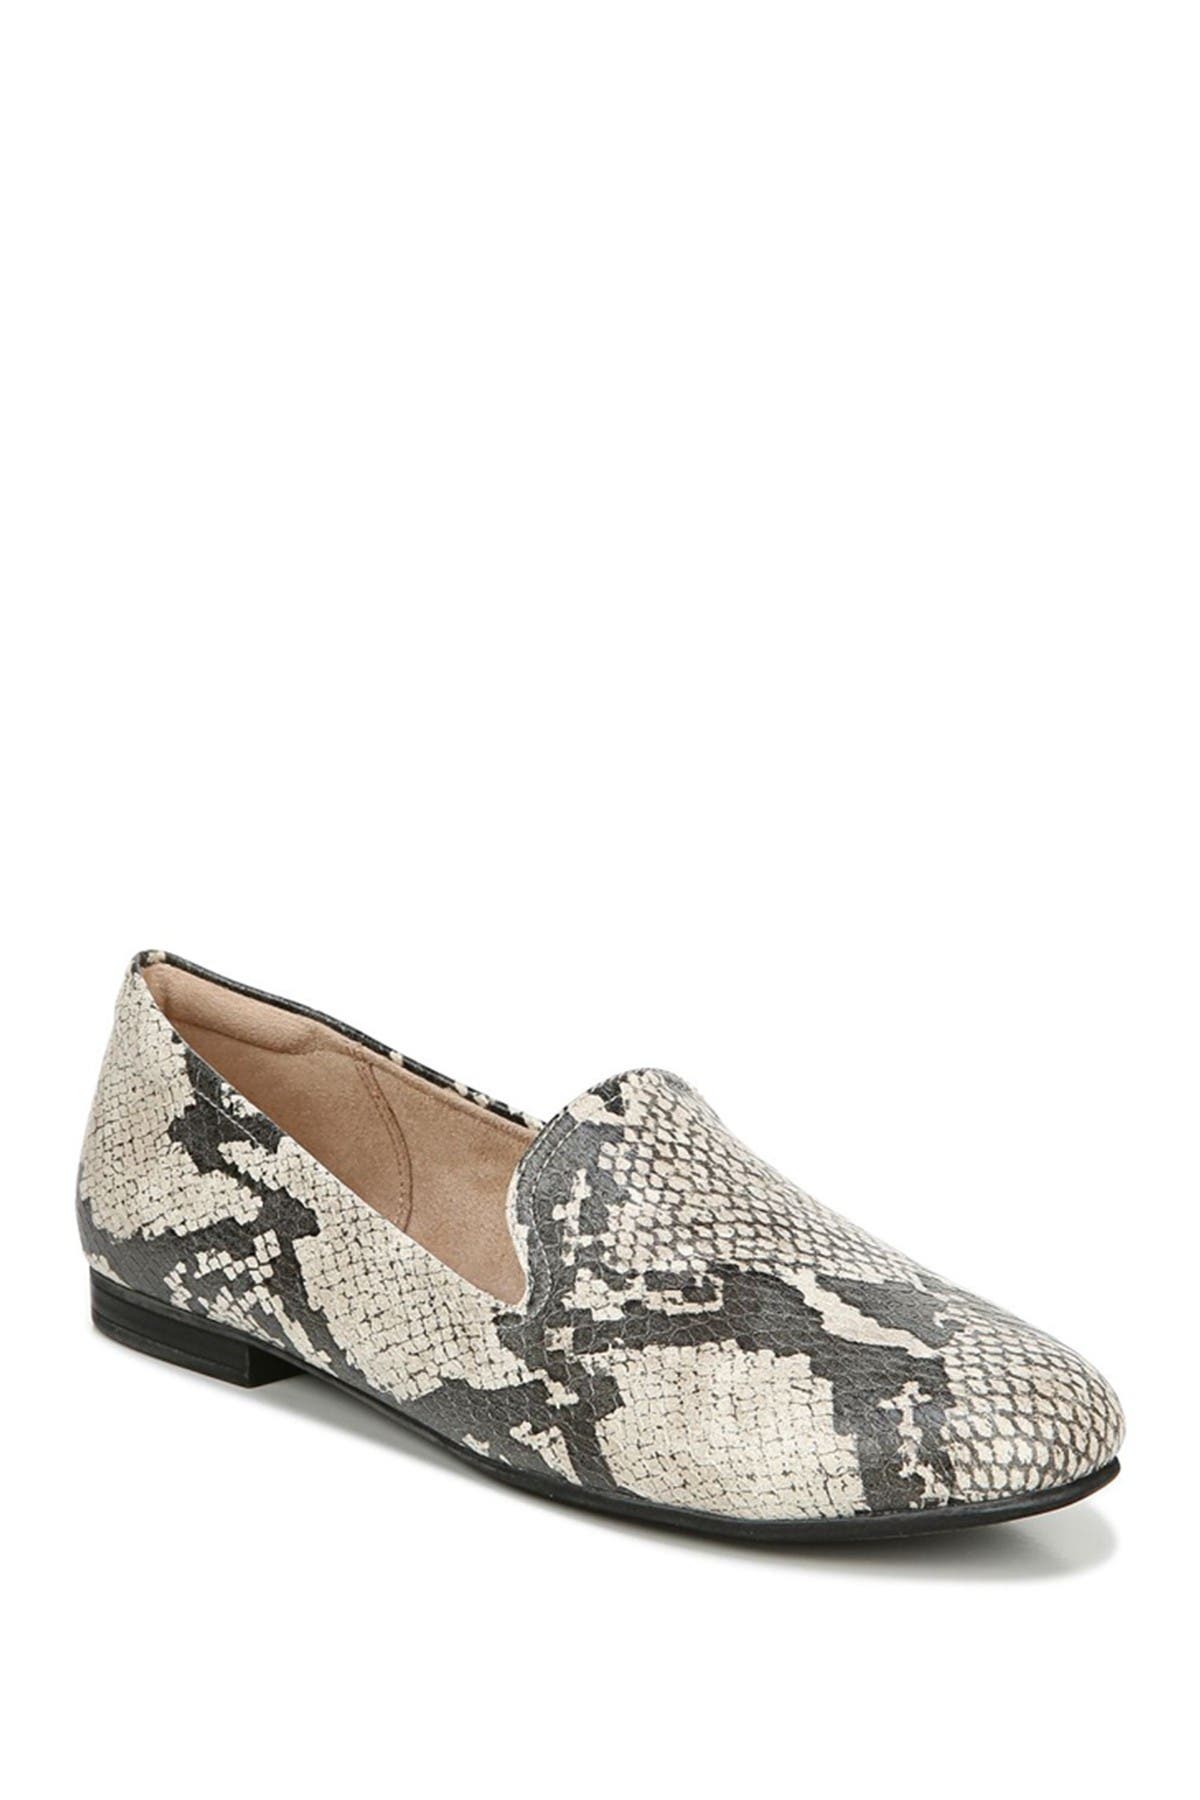 naturalizer alexis loafer